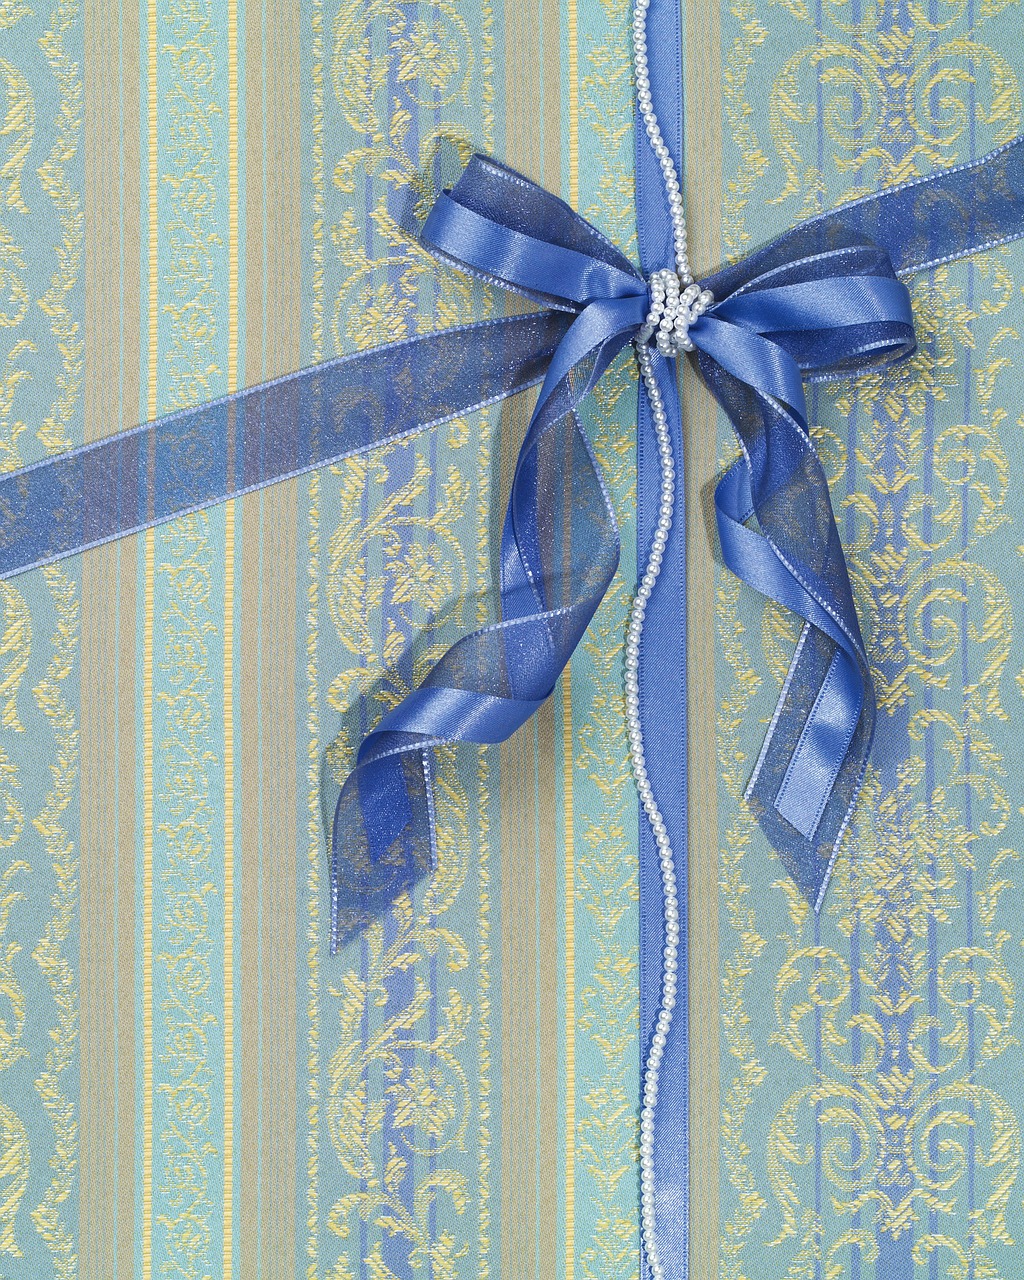 packaging gift package pattern free photo